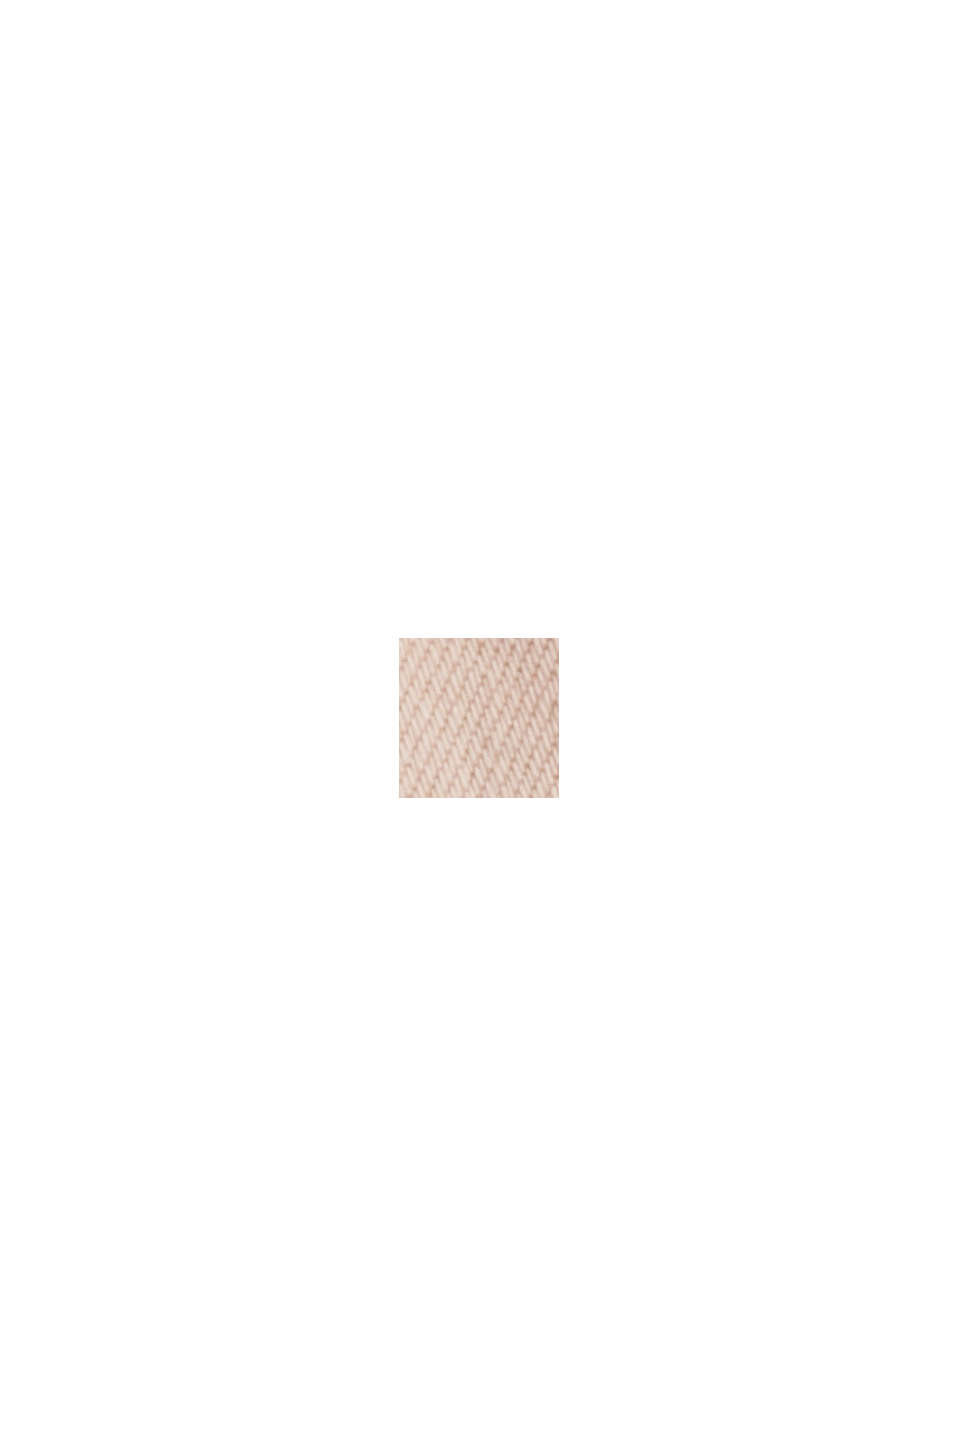 Pants woven high rise straight, DUSTY NUDE, swatch